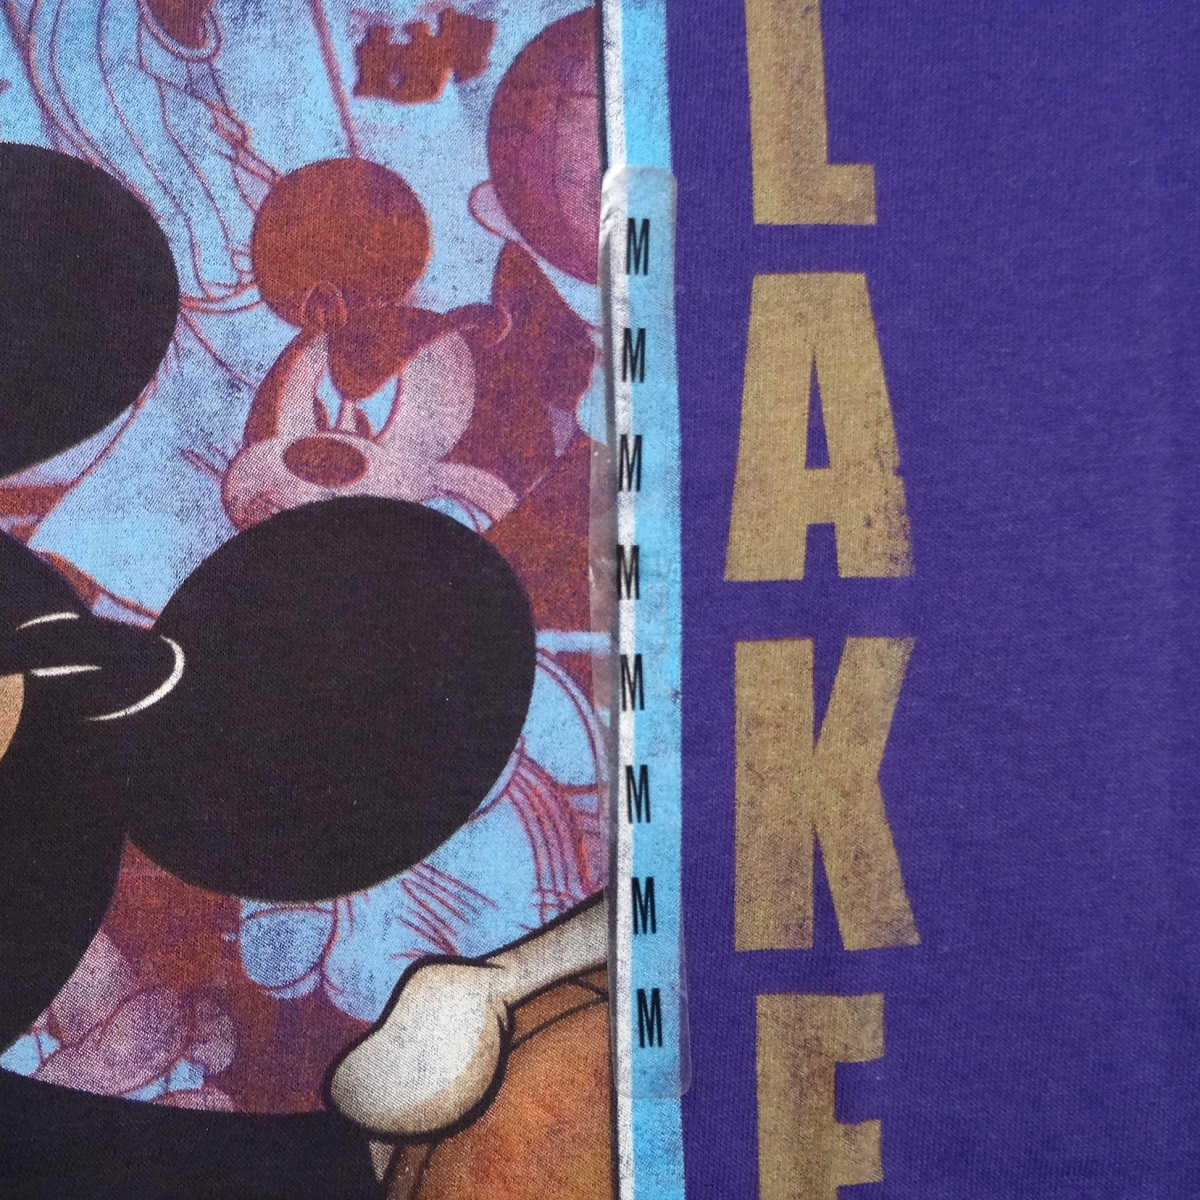 A purple shirt with a mickey mouse and the word lake on it - Los Angeles Lakers